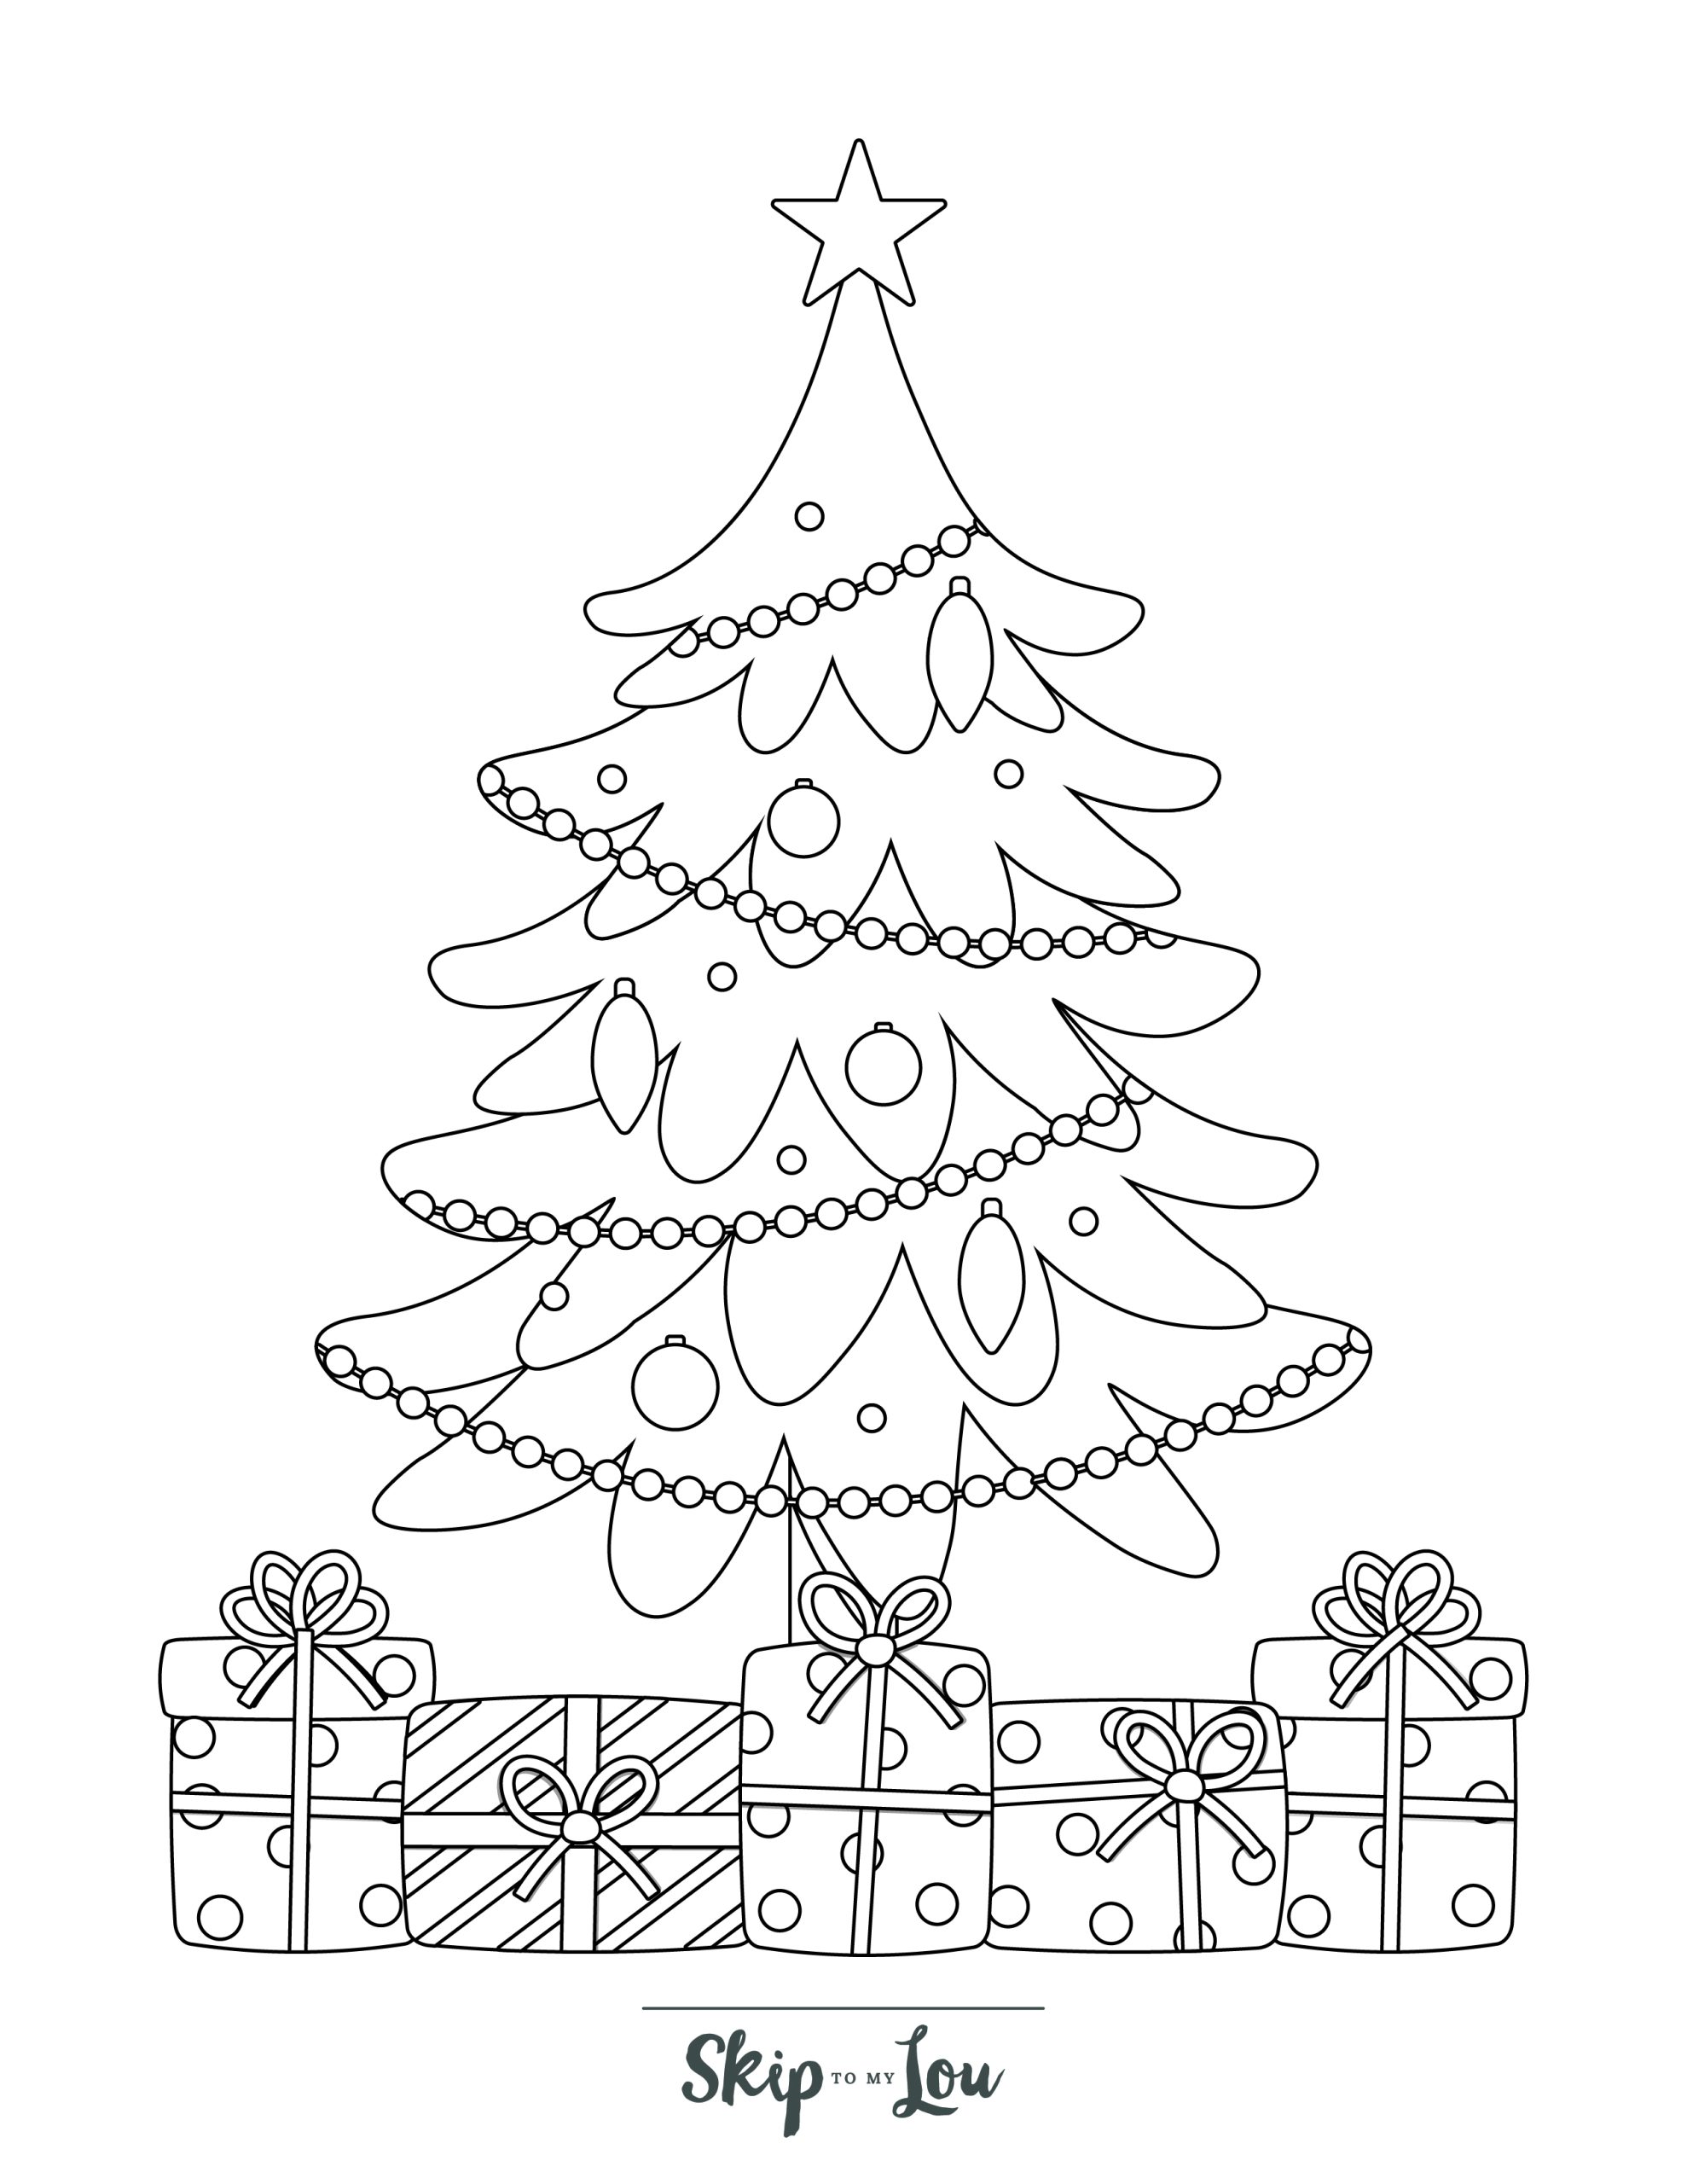 Holiday Coloring Page 6 - Line drawing of a Christmas tree with gifts underneath